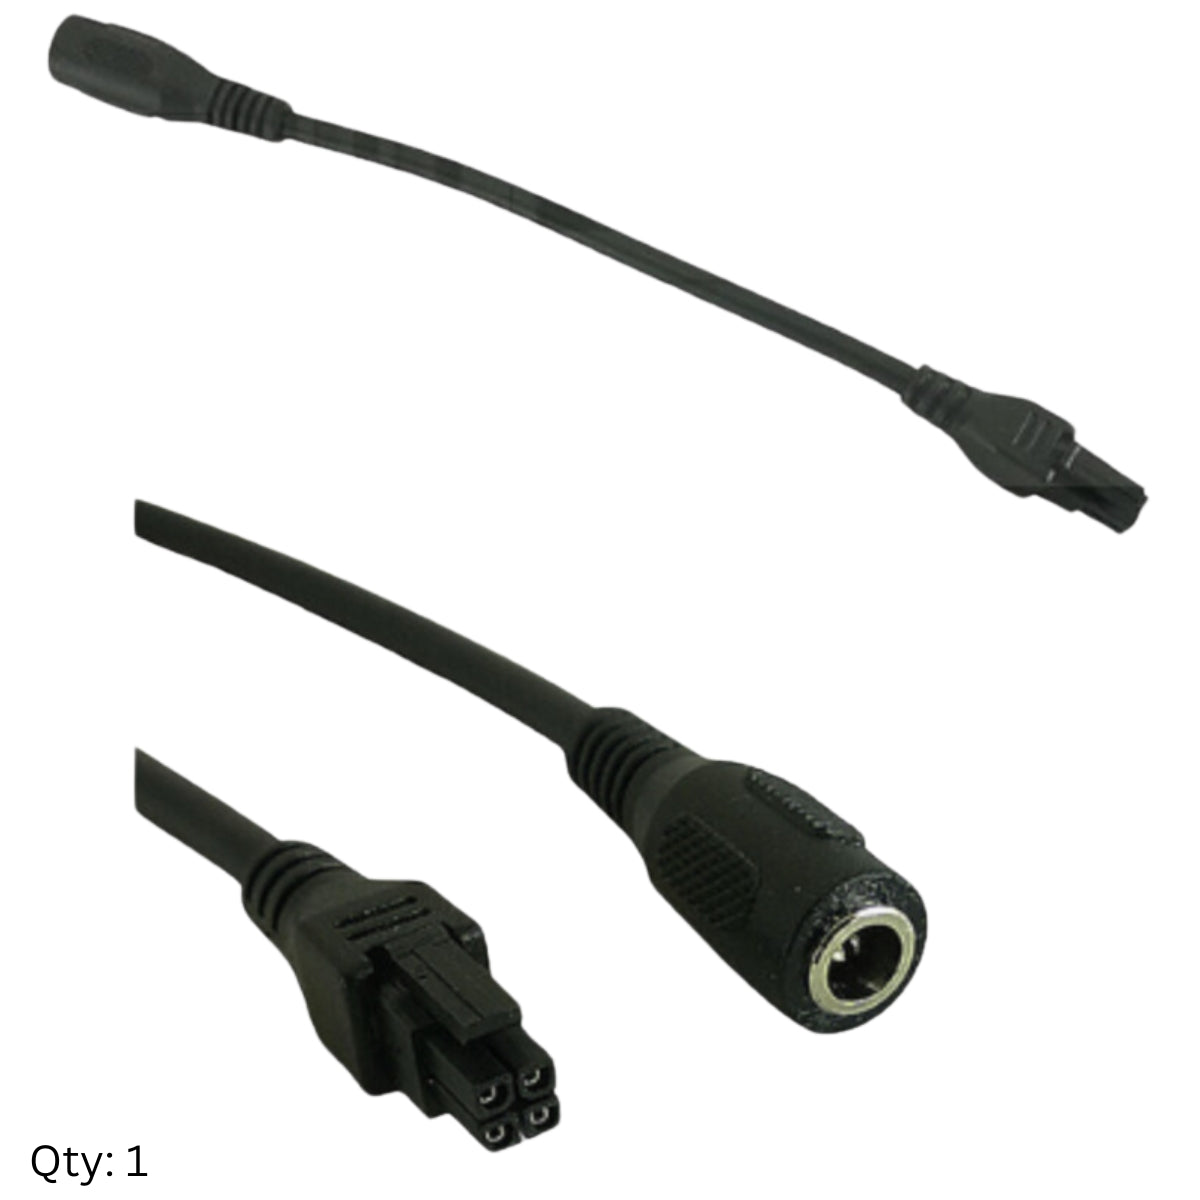 2.1mm to 4-Pin DIN Power Cable Adapter